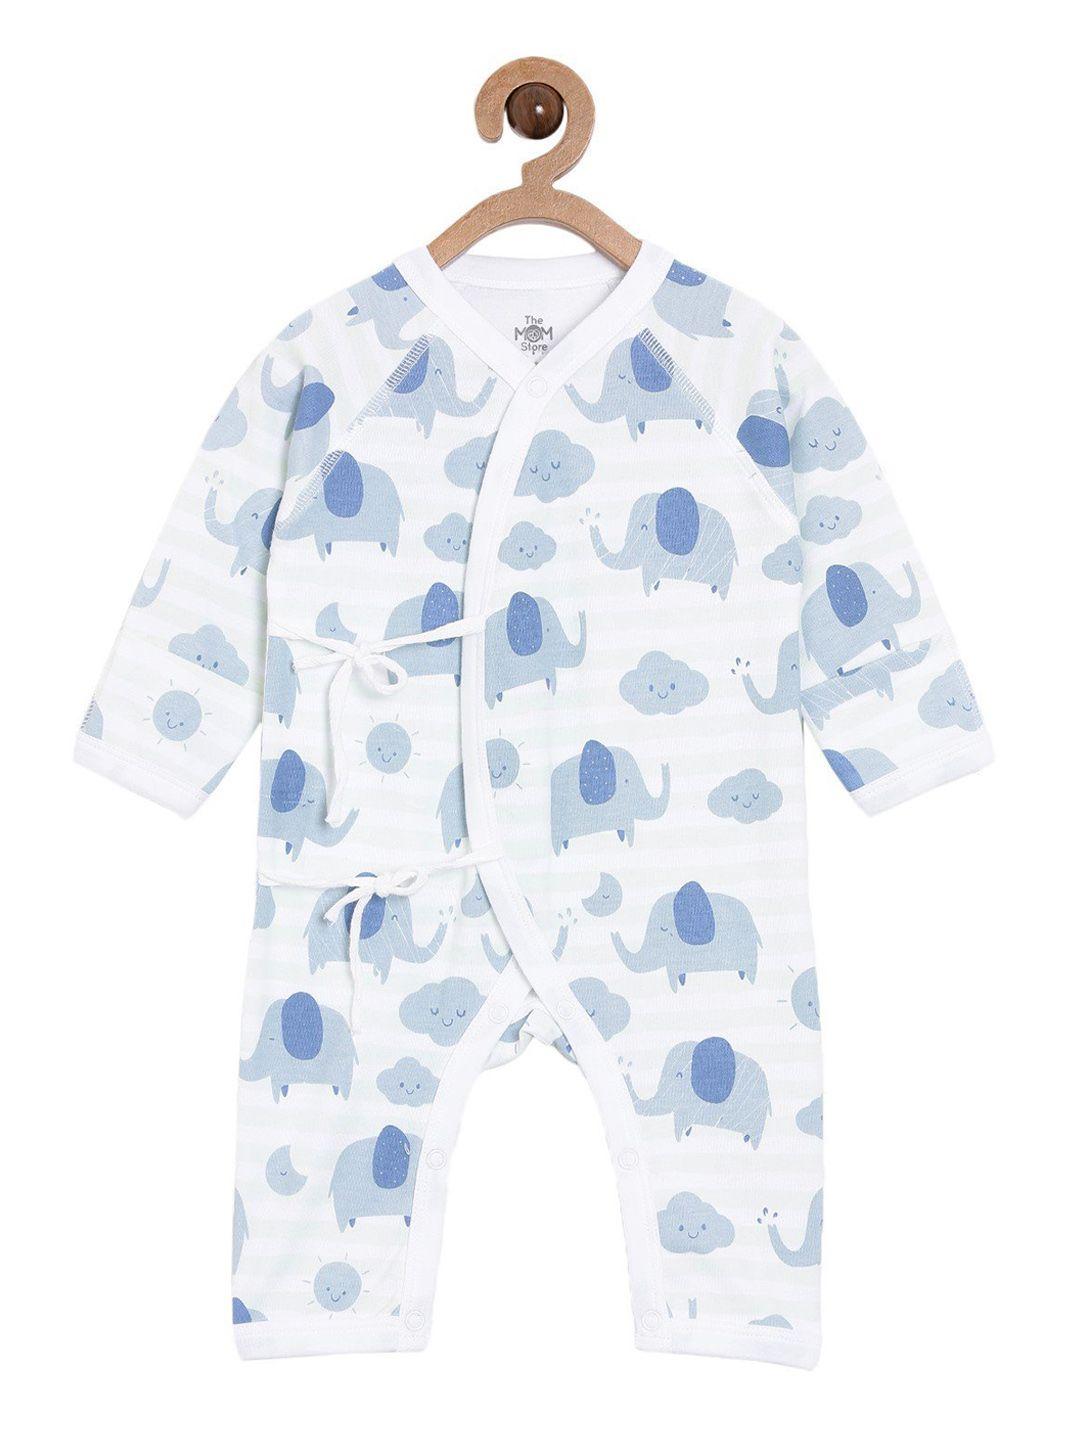 the-mom-store-infants-white-&-blue-printed-cotton-romper